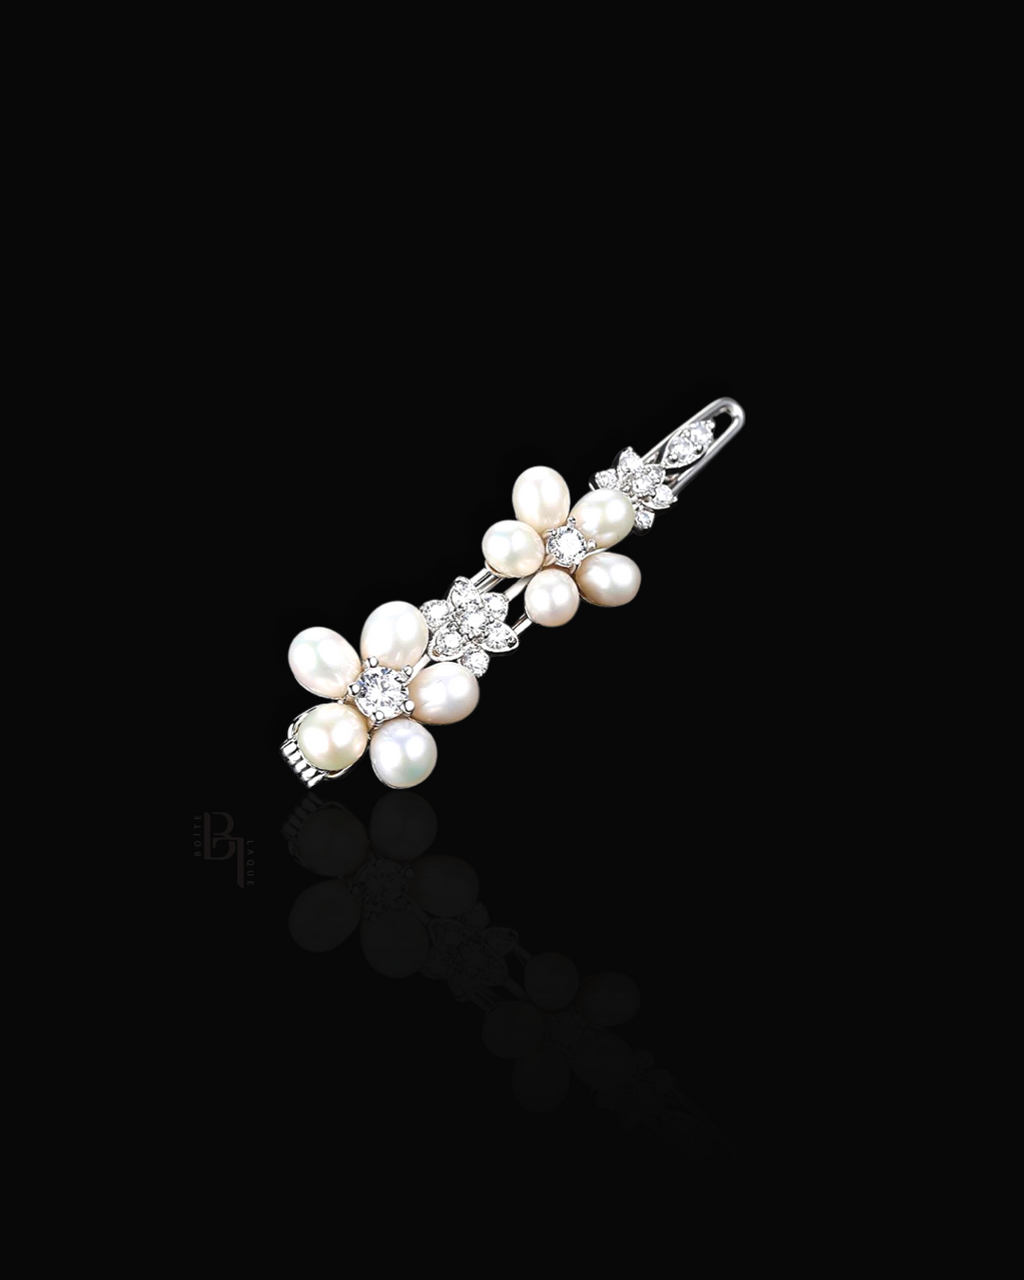 Bridal Freshwater Pearls 14k White Gold Hair Pin with Set of Signature Silver Bobby Pins